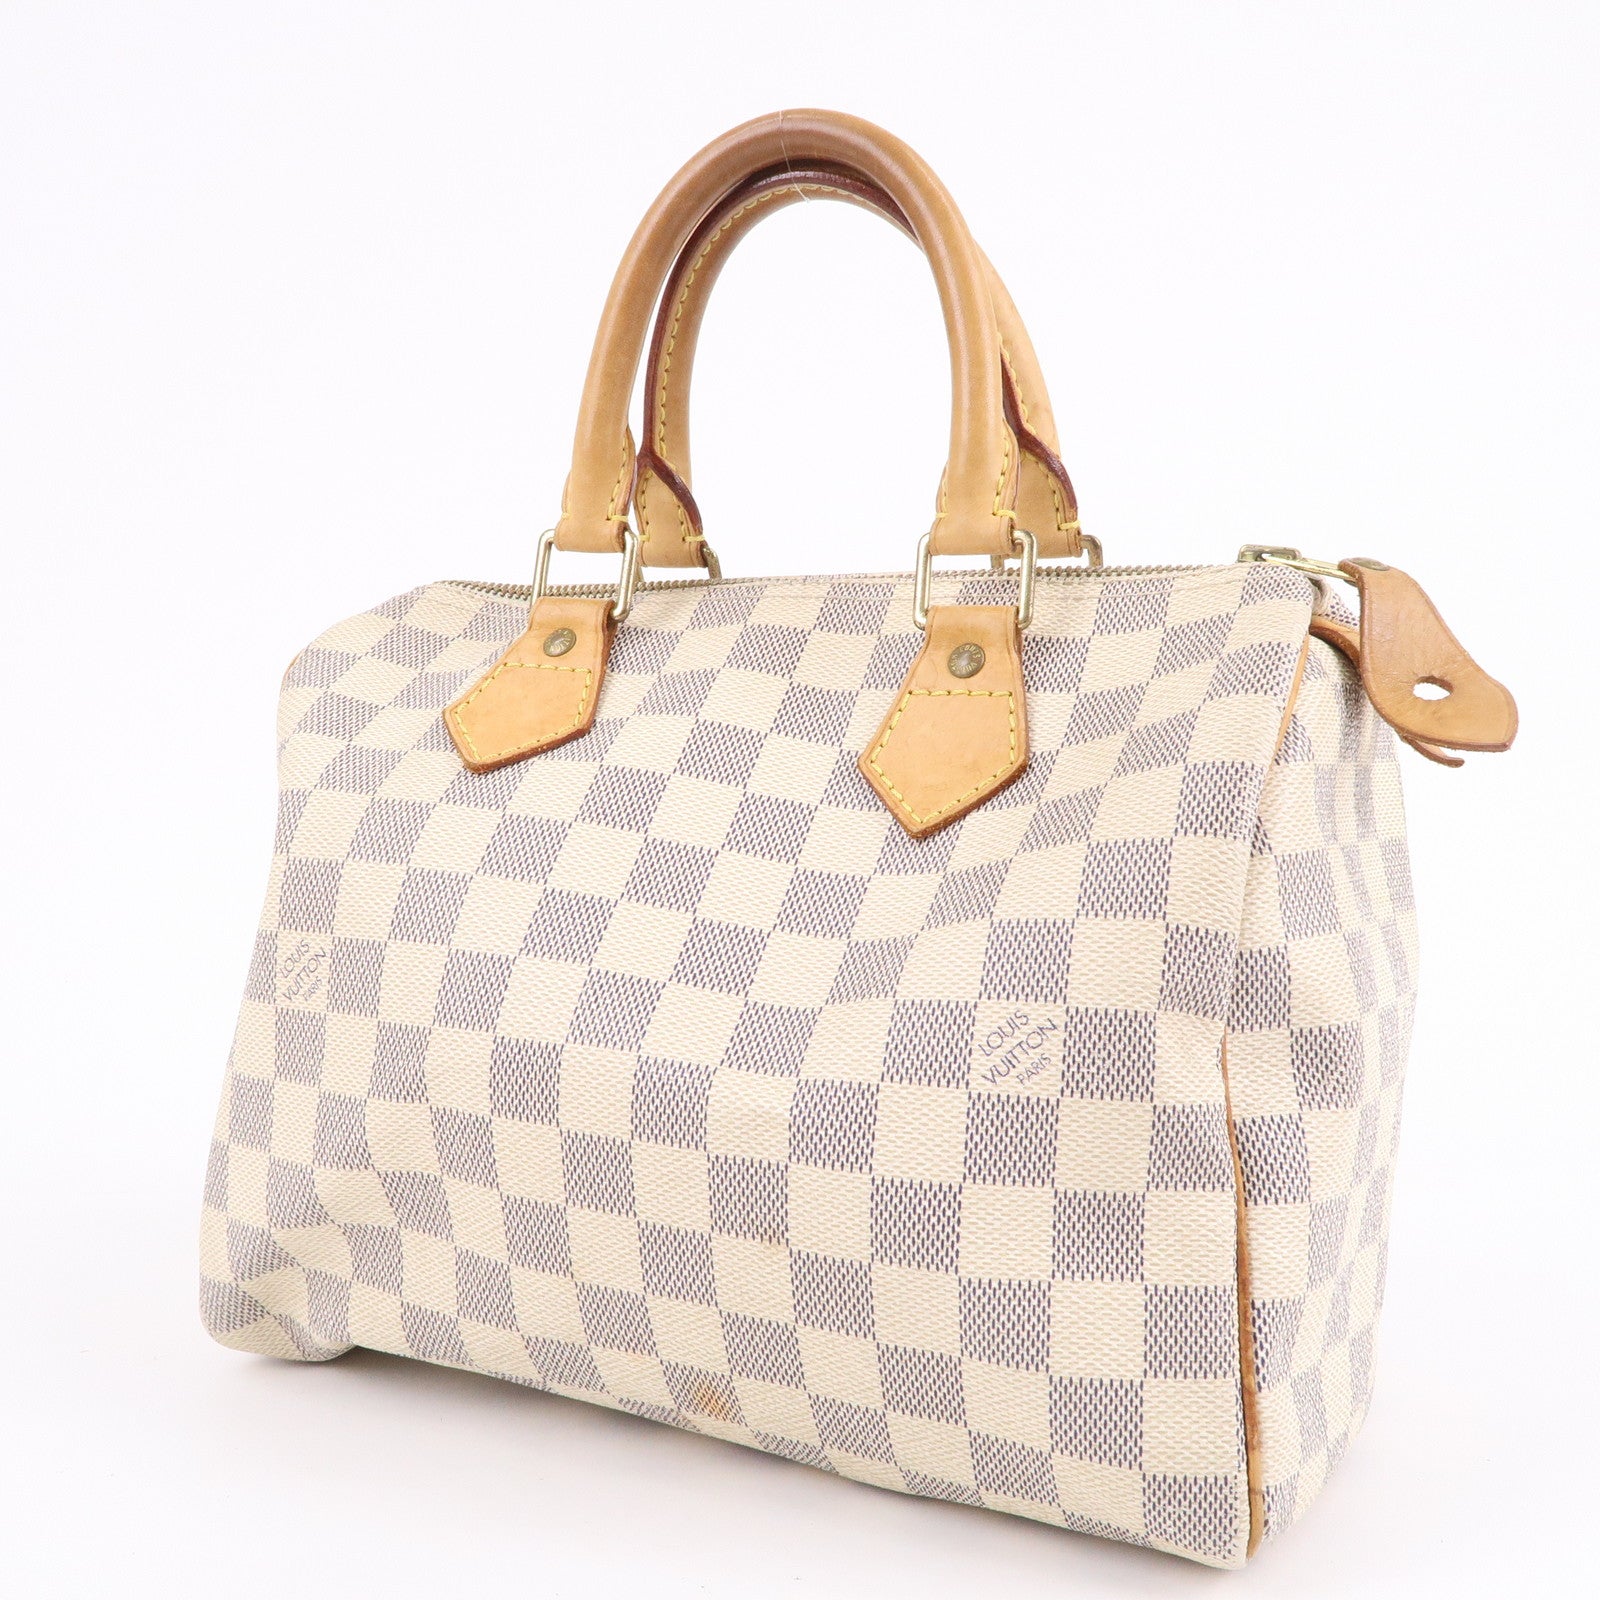 LOUIS VUITTON, Speedy 25 in white damier canvas For Sale at